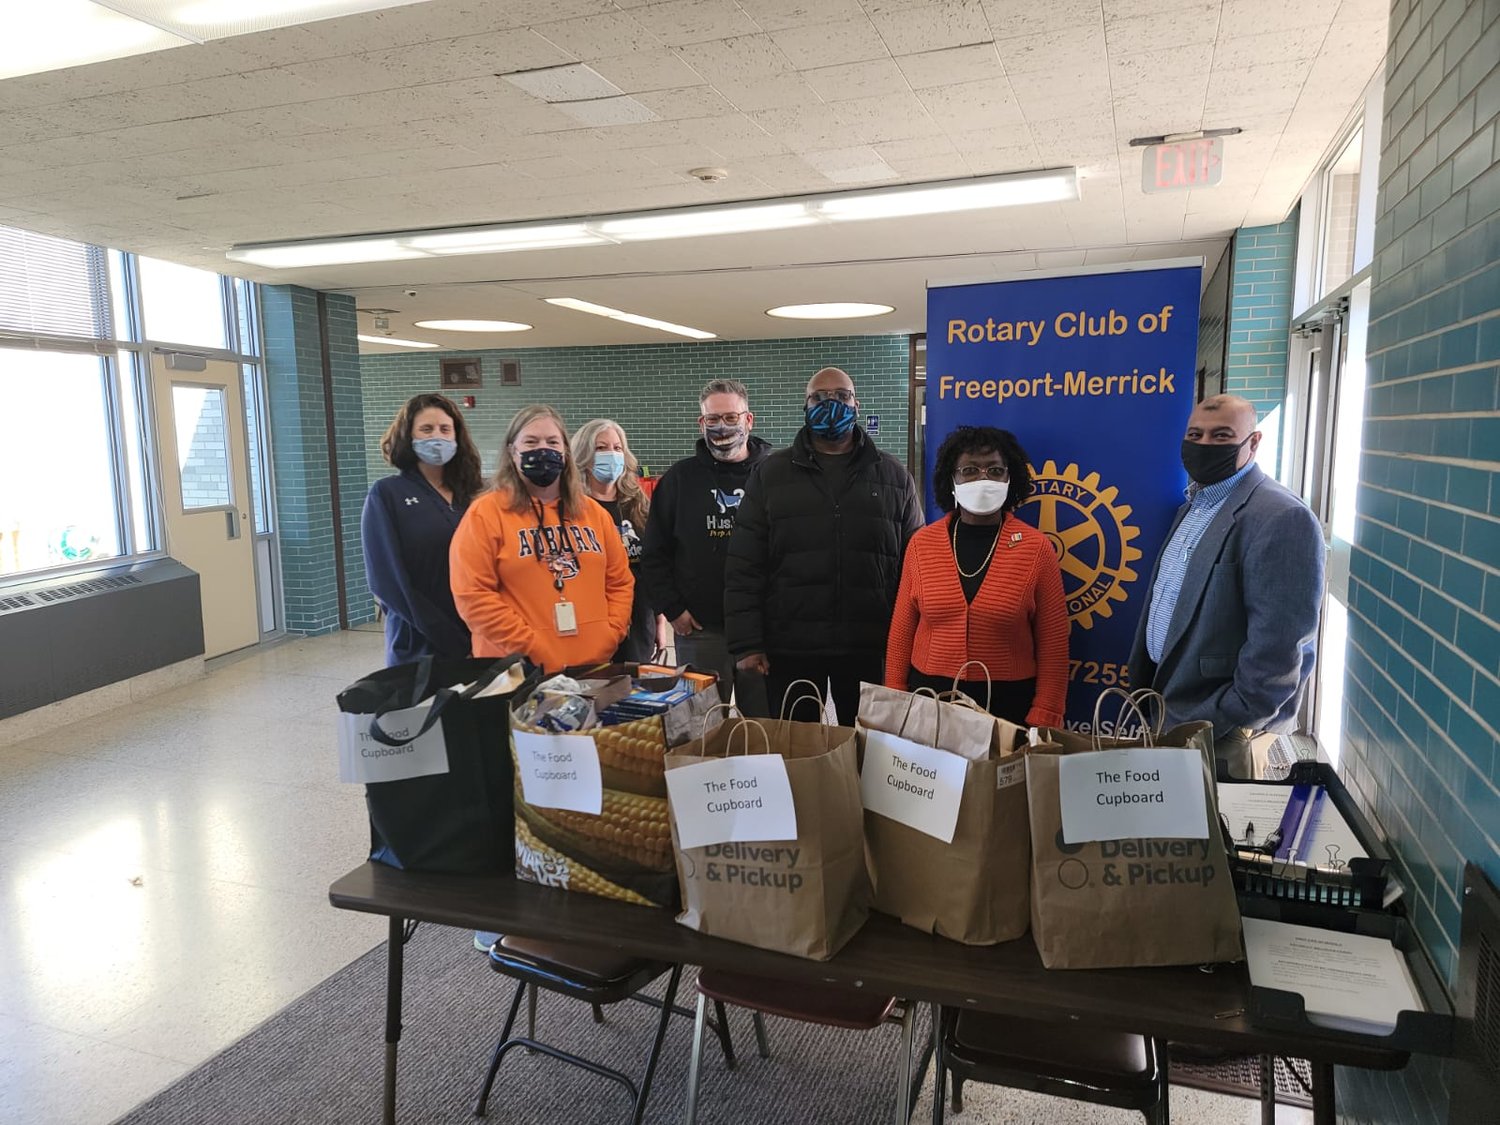 Four members of the Food Cupboard pantry accepted nonperishable items from Freeport-Merrick Rotary Club President Marc Rigueur, incoming Vice-President Comfort Itoka, and Treasurer Ken Dookram.